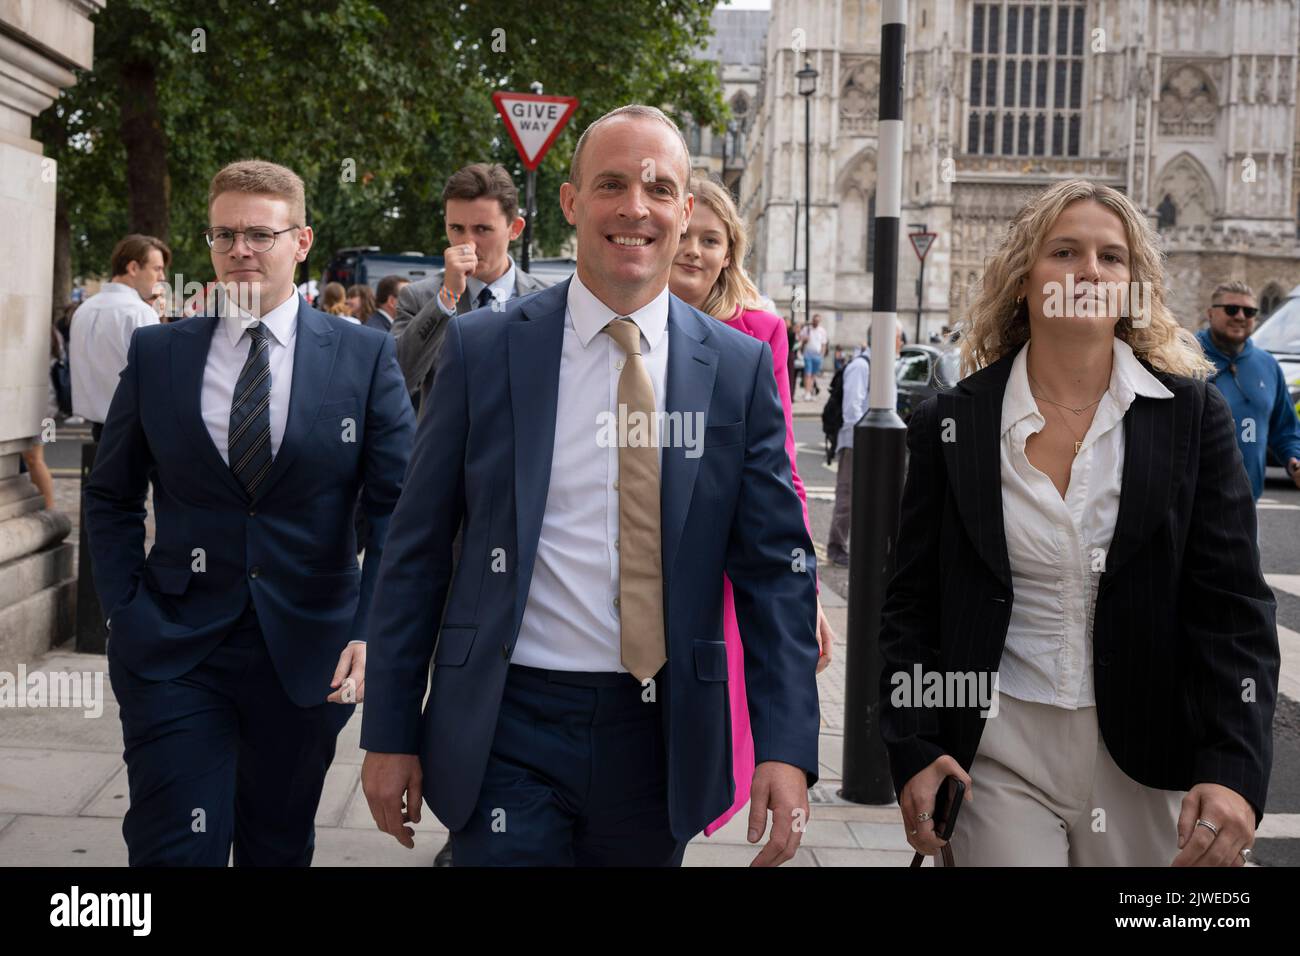 On the day that Liz Truss MP was elected by Conservative Party members, to replace Boris Johnson and be their new leader and the UK's next Prime Minister, Dominic Raab MP leaves Queen Elizabeth Hall after the vote result, on 5th September 2022, in London, England. In a 2 month-long candidate election that followed Johnson's removal from office, Truss beat her last rival Rishi Sunak, with a majority of 57% of the vote. Stock Photo